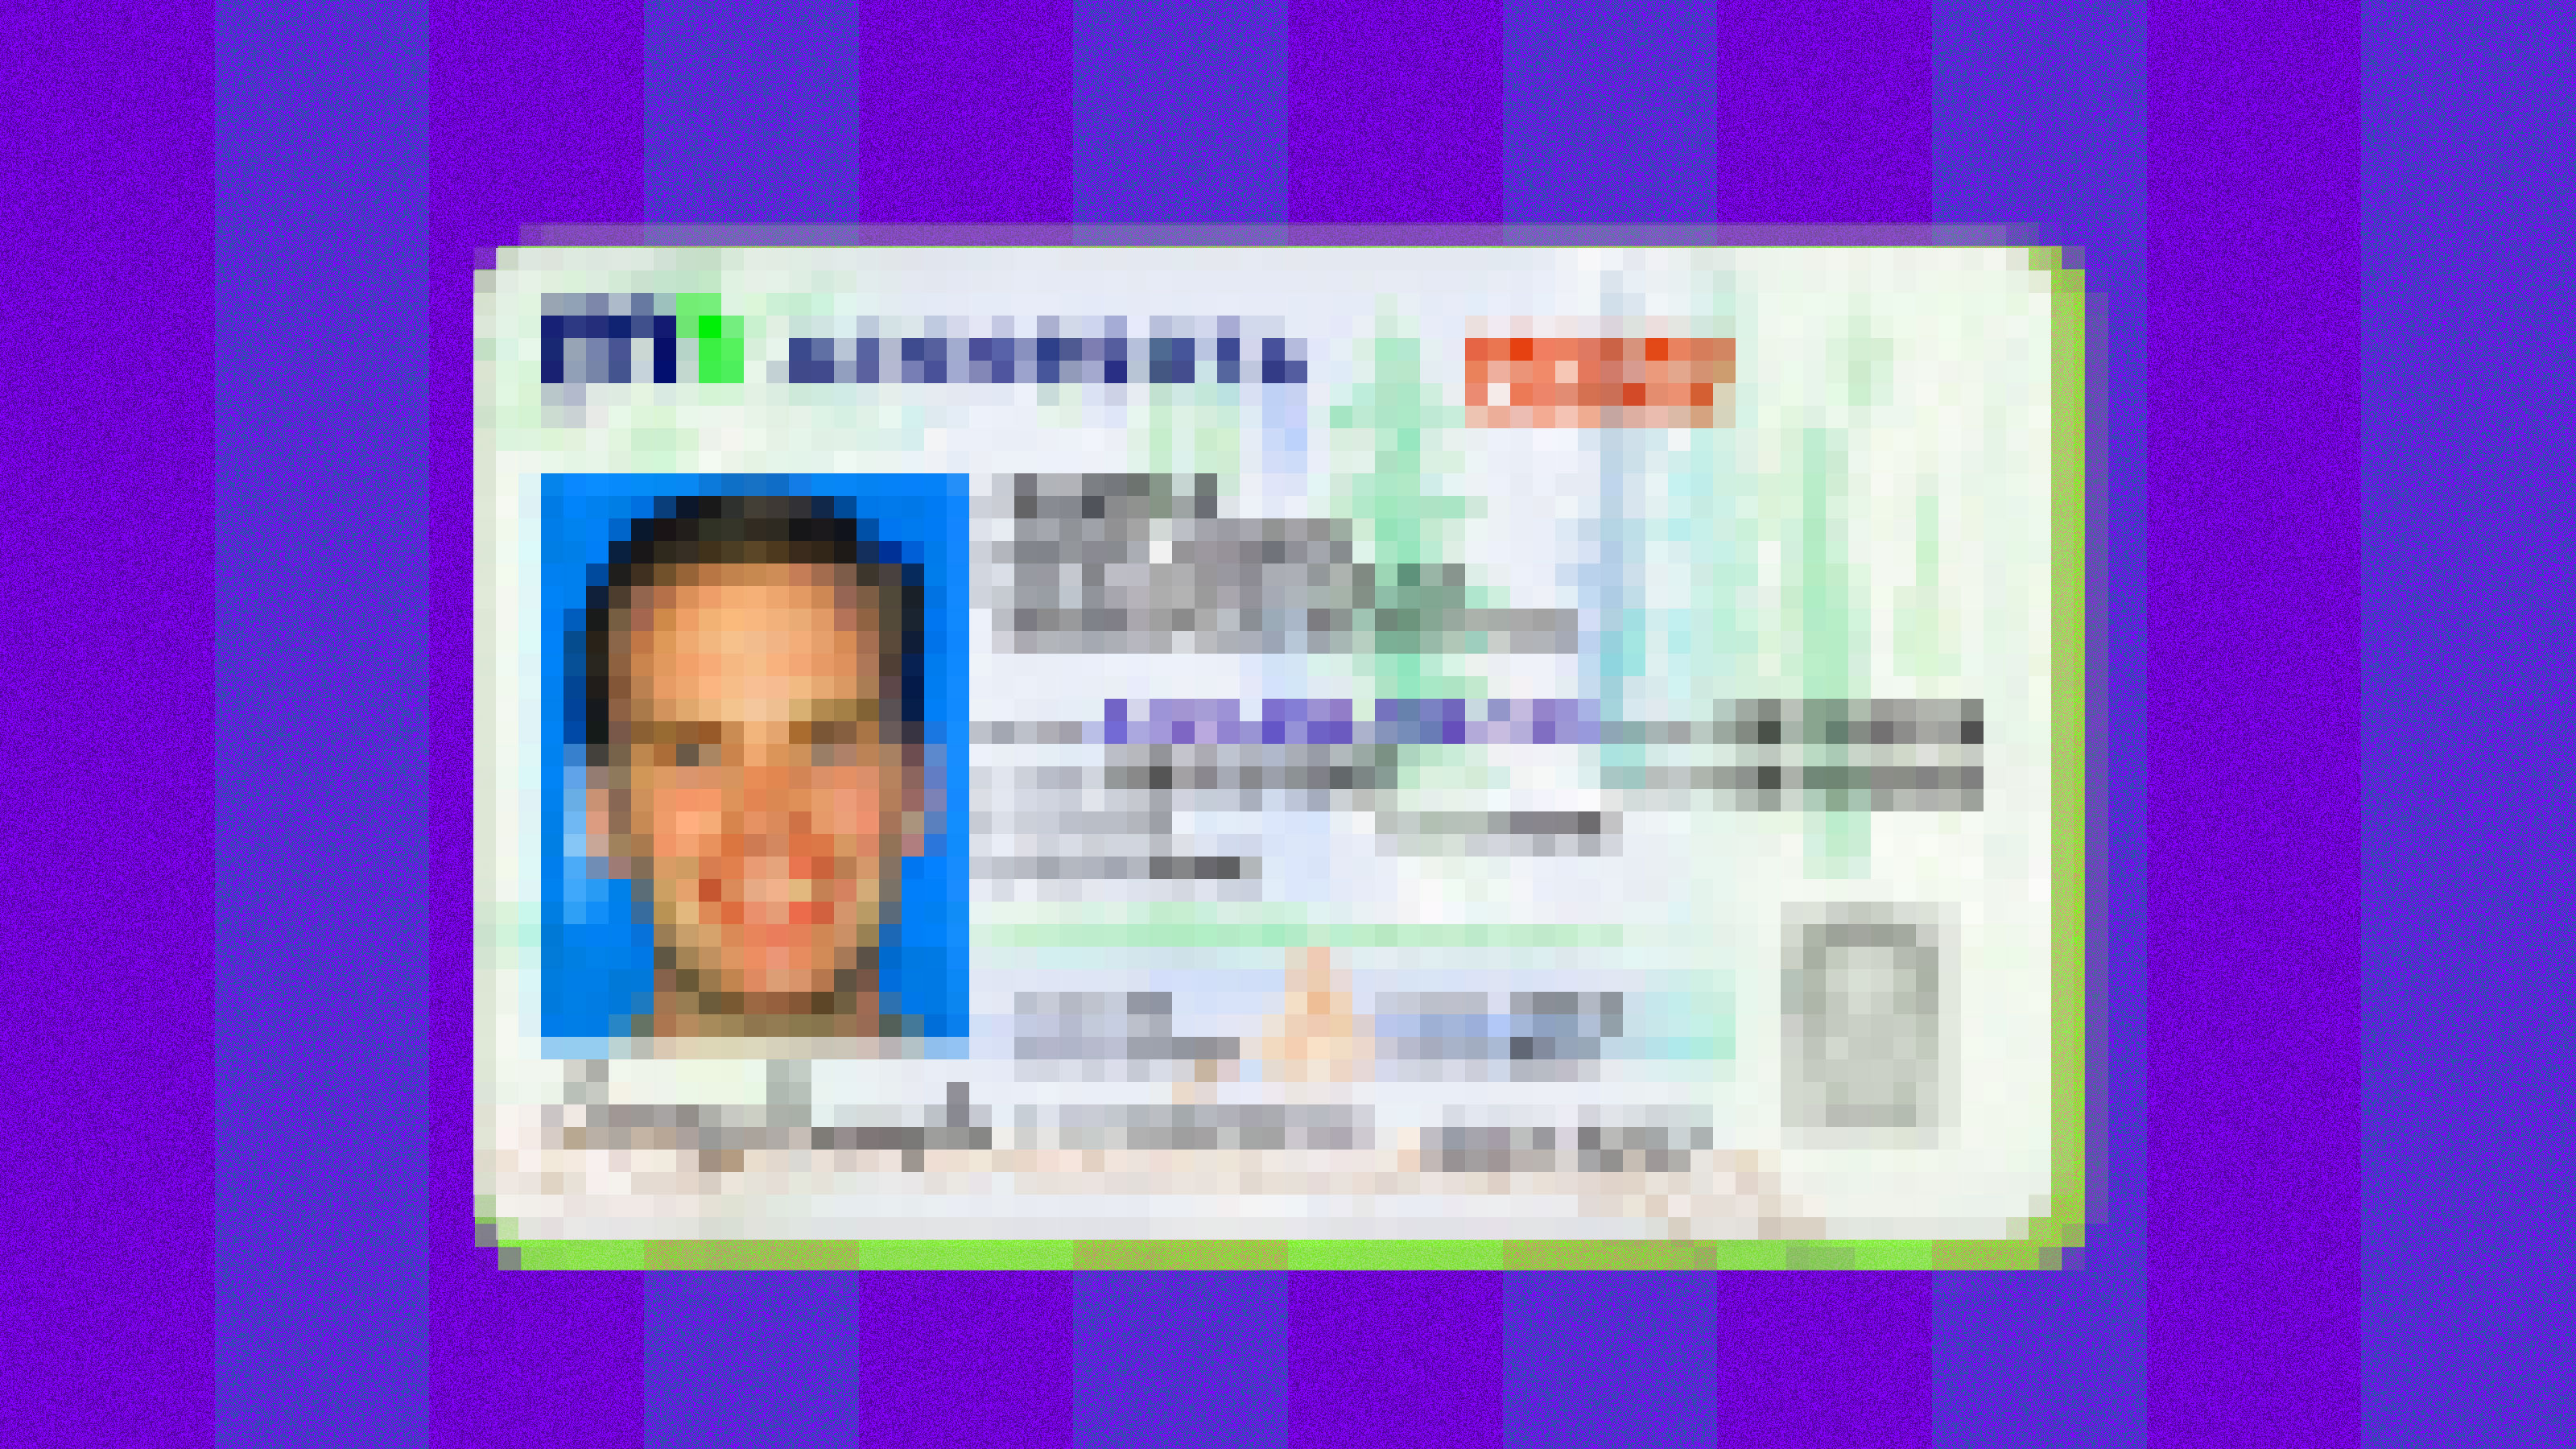 An image of a pixelated ID card